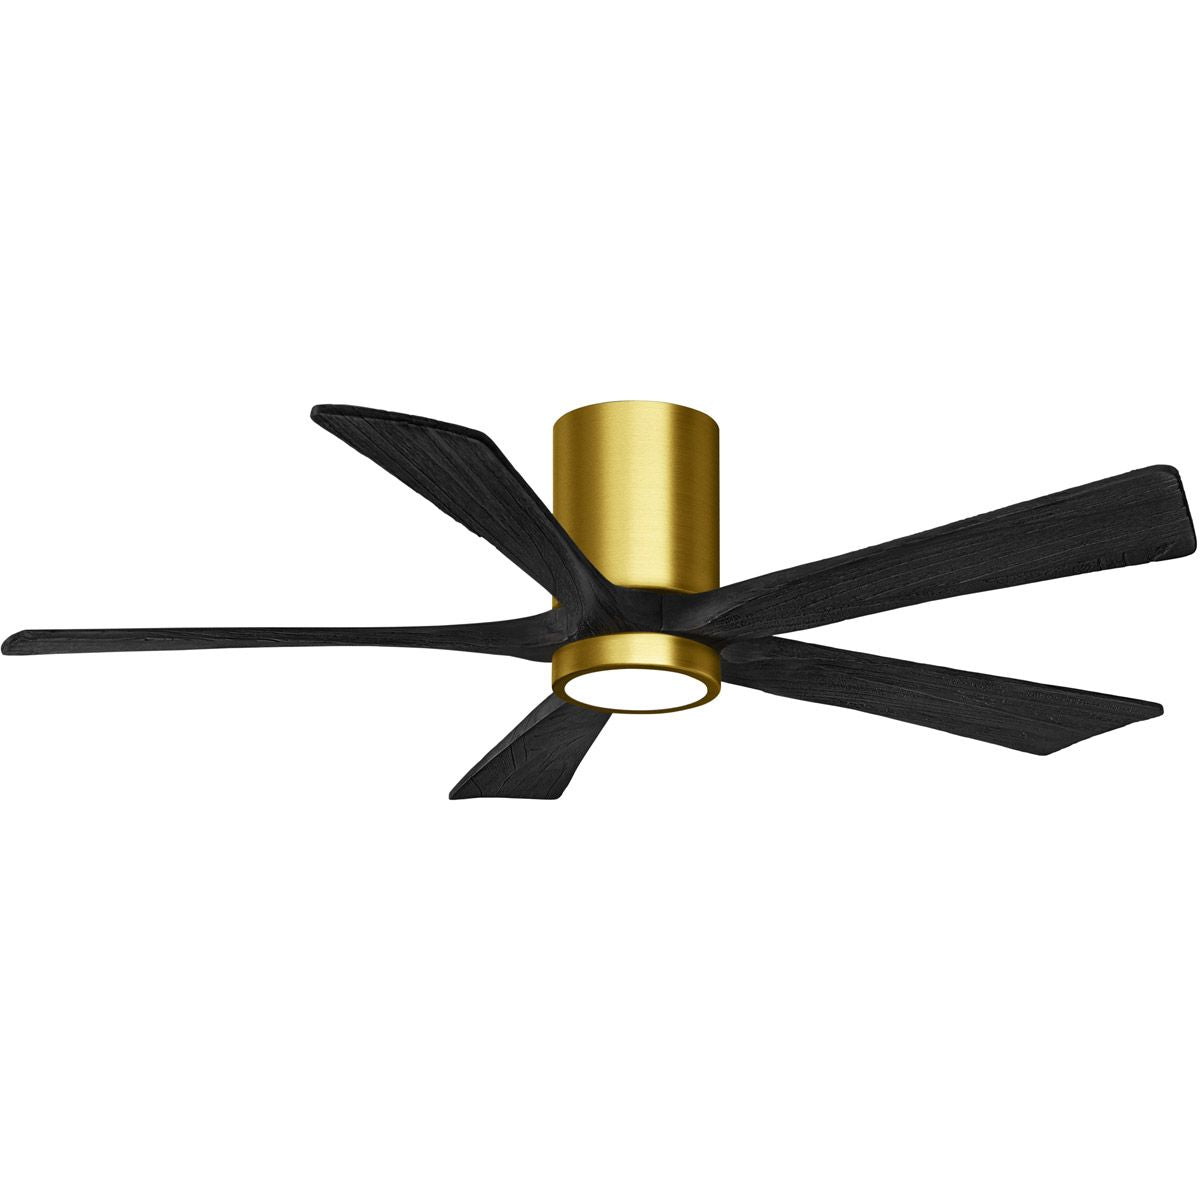 Irene 52 Inch Modern Outdoor Ceiling Fan With Light, Wall And Remote Control Included